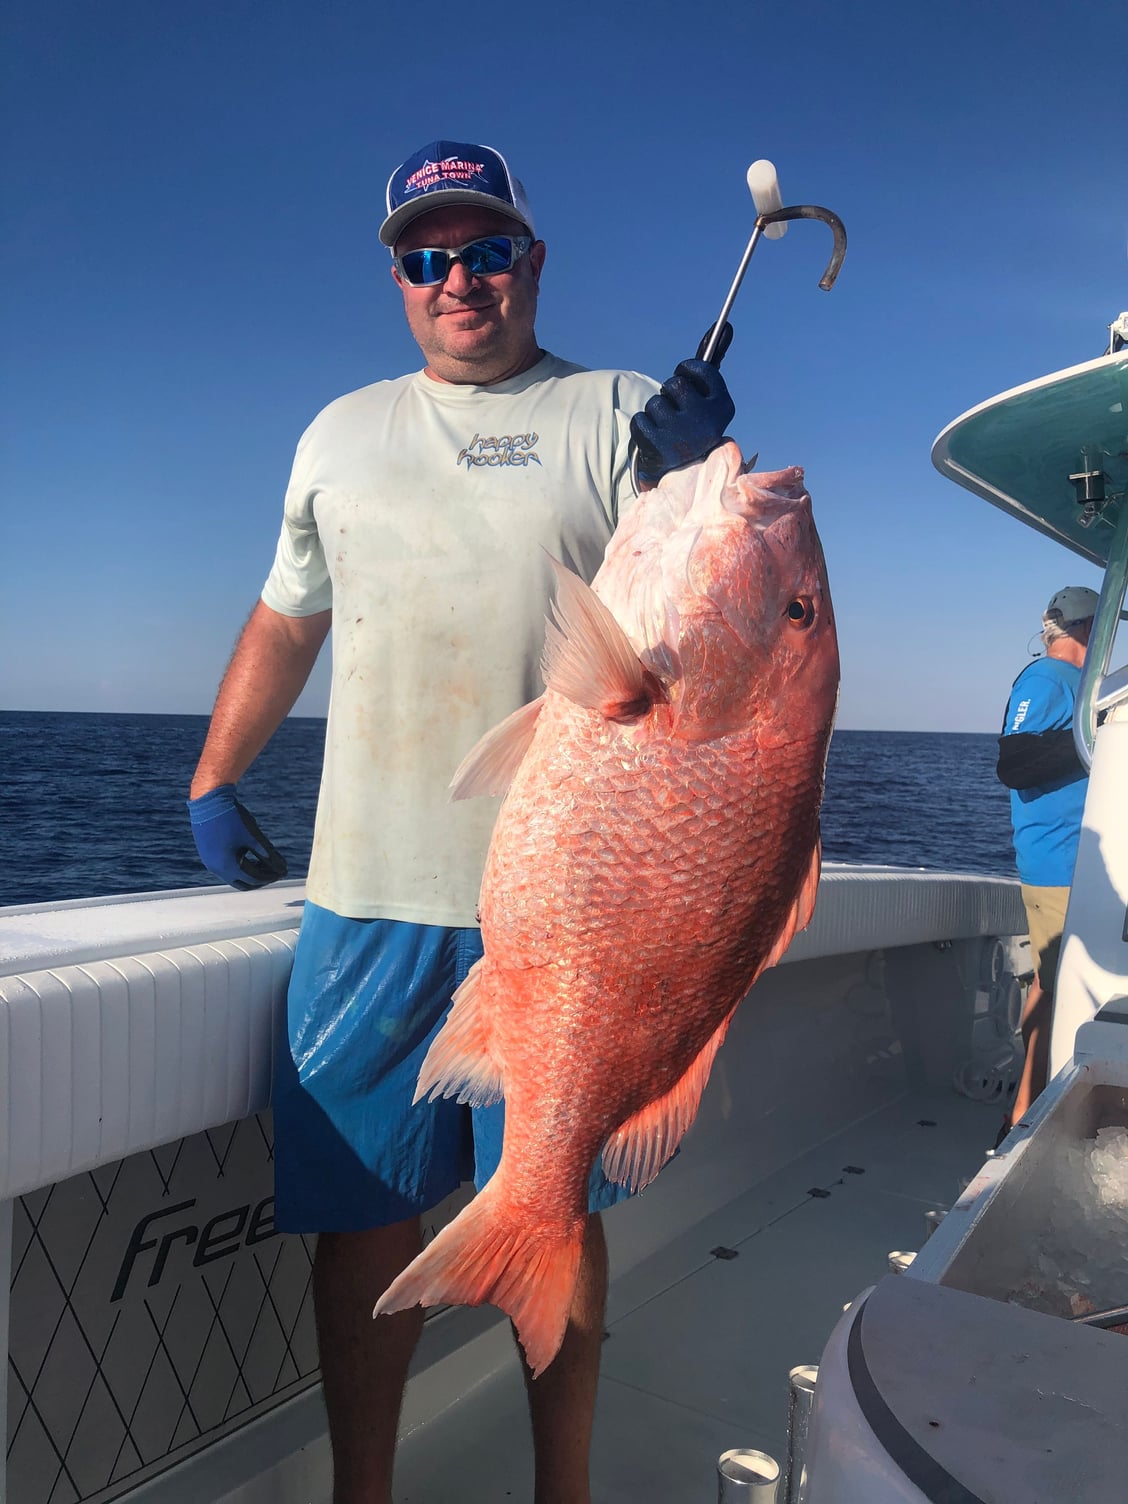 Snapper weight - The Hull Truth - Boating and Fishing Forum